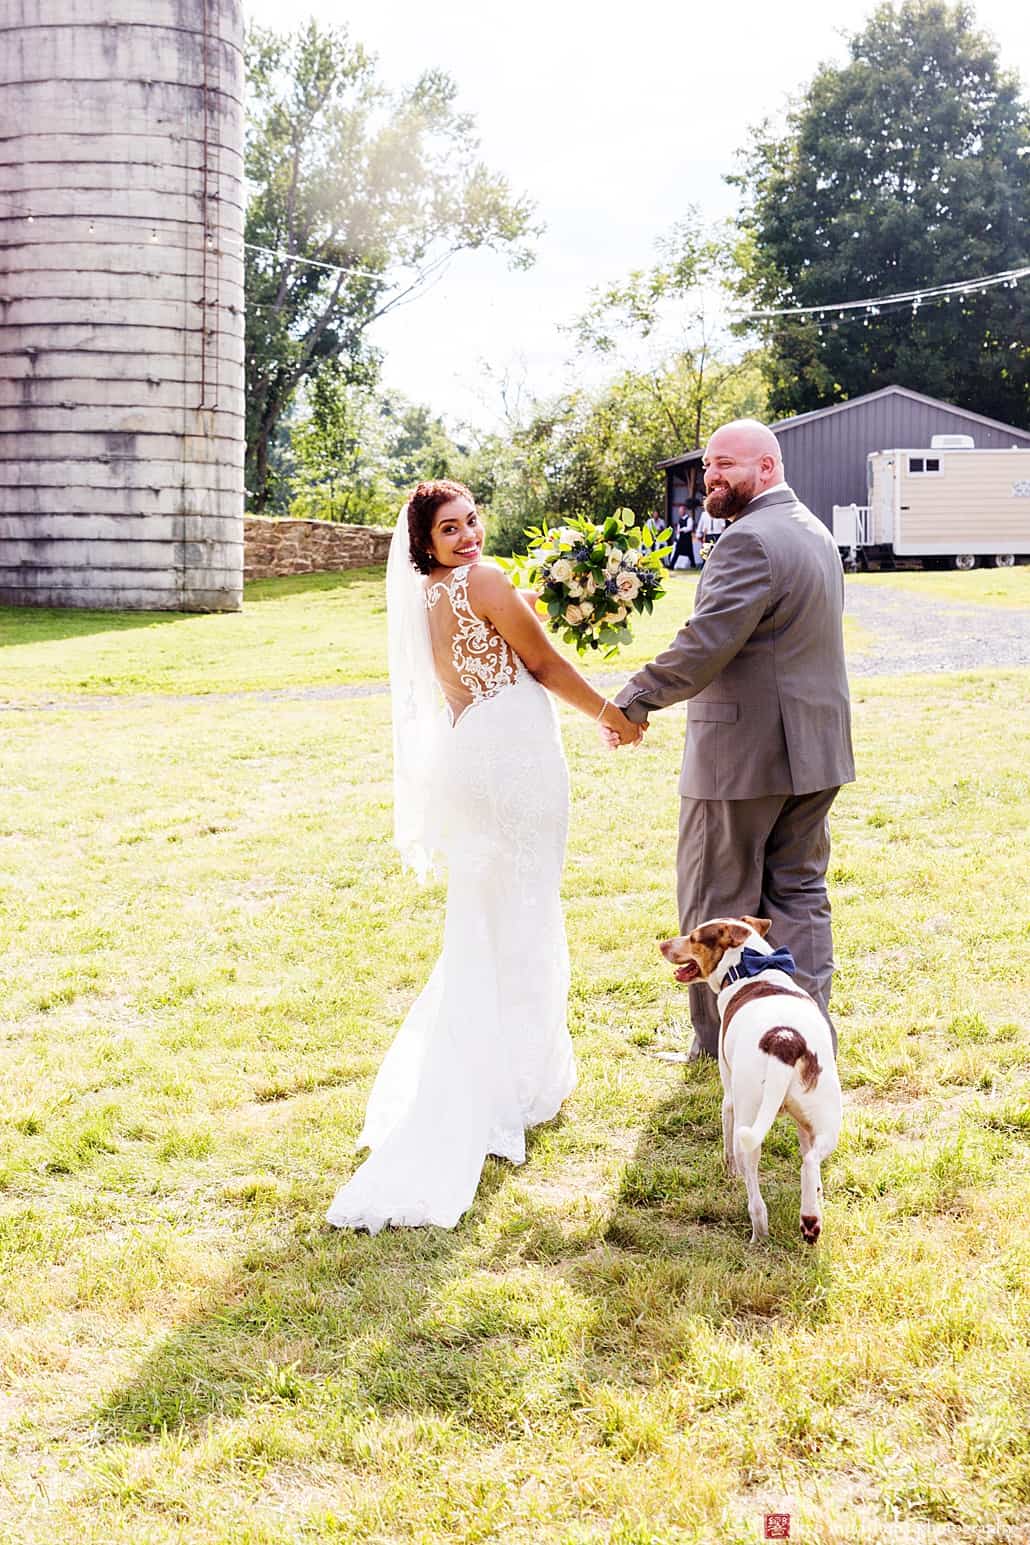 Dog follows bride and groom as they depart outdoor ceremony at Glenmoore Farm, one of the best NJ farm wedding venues in central NJ